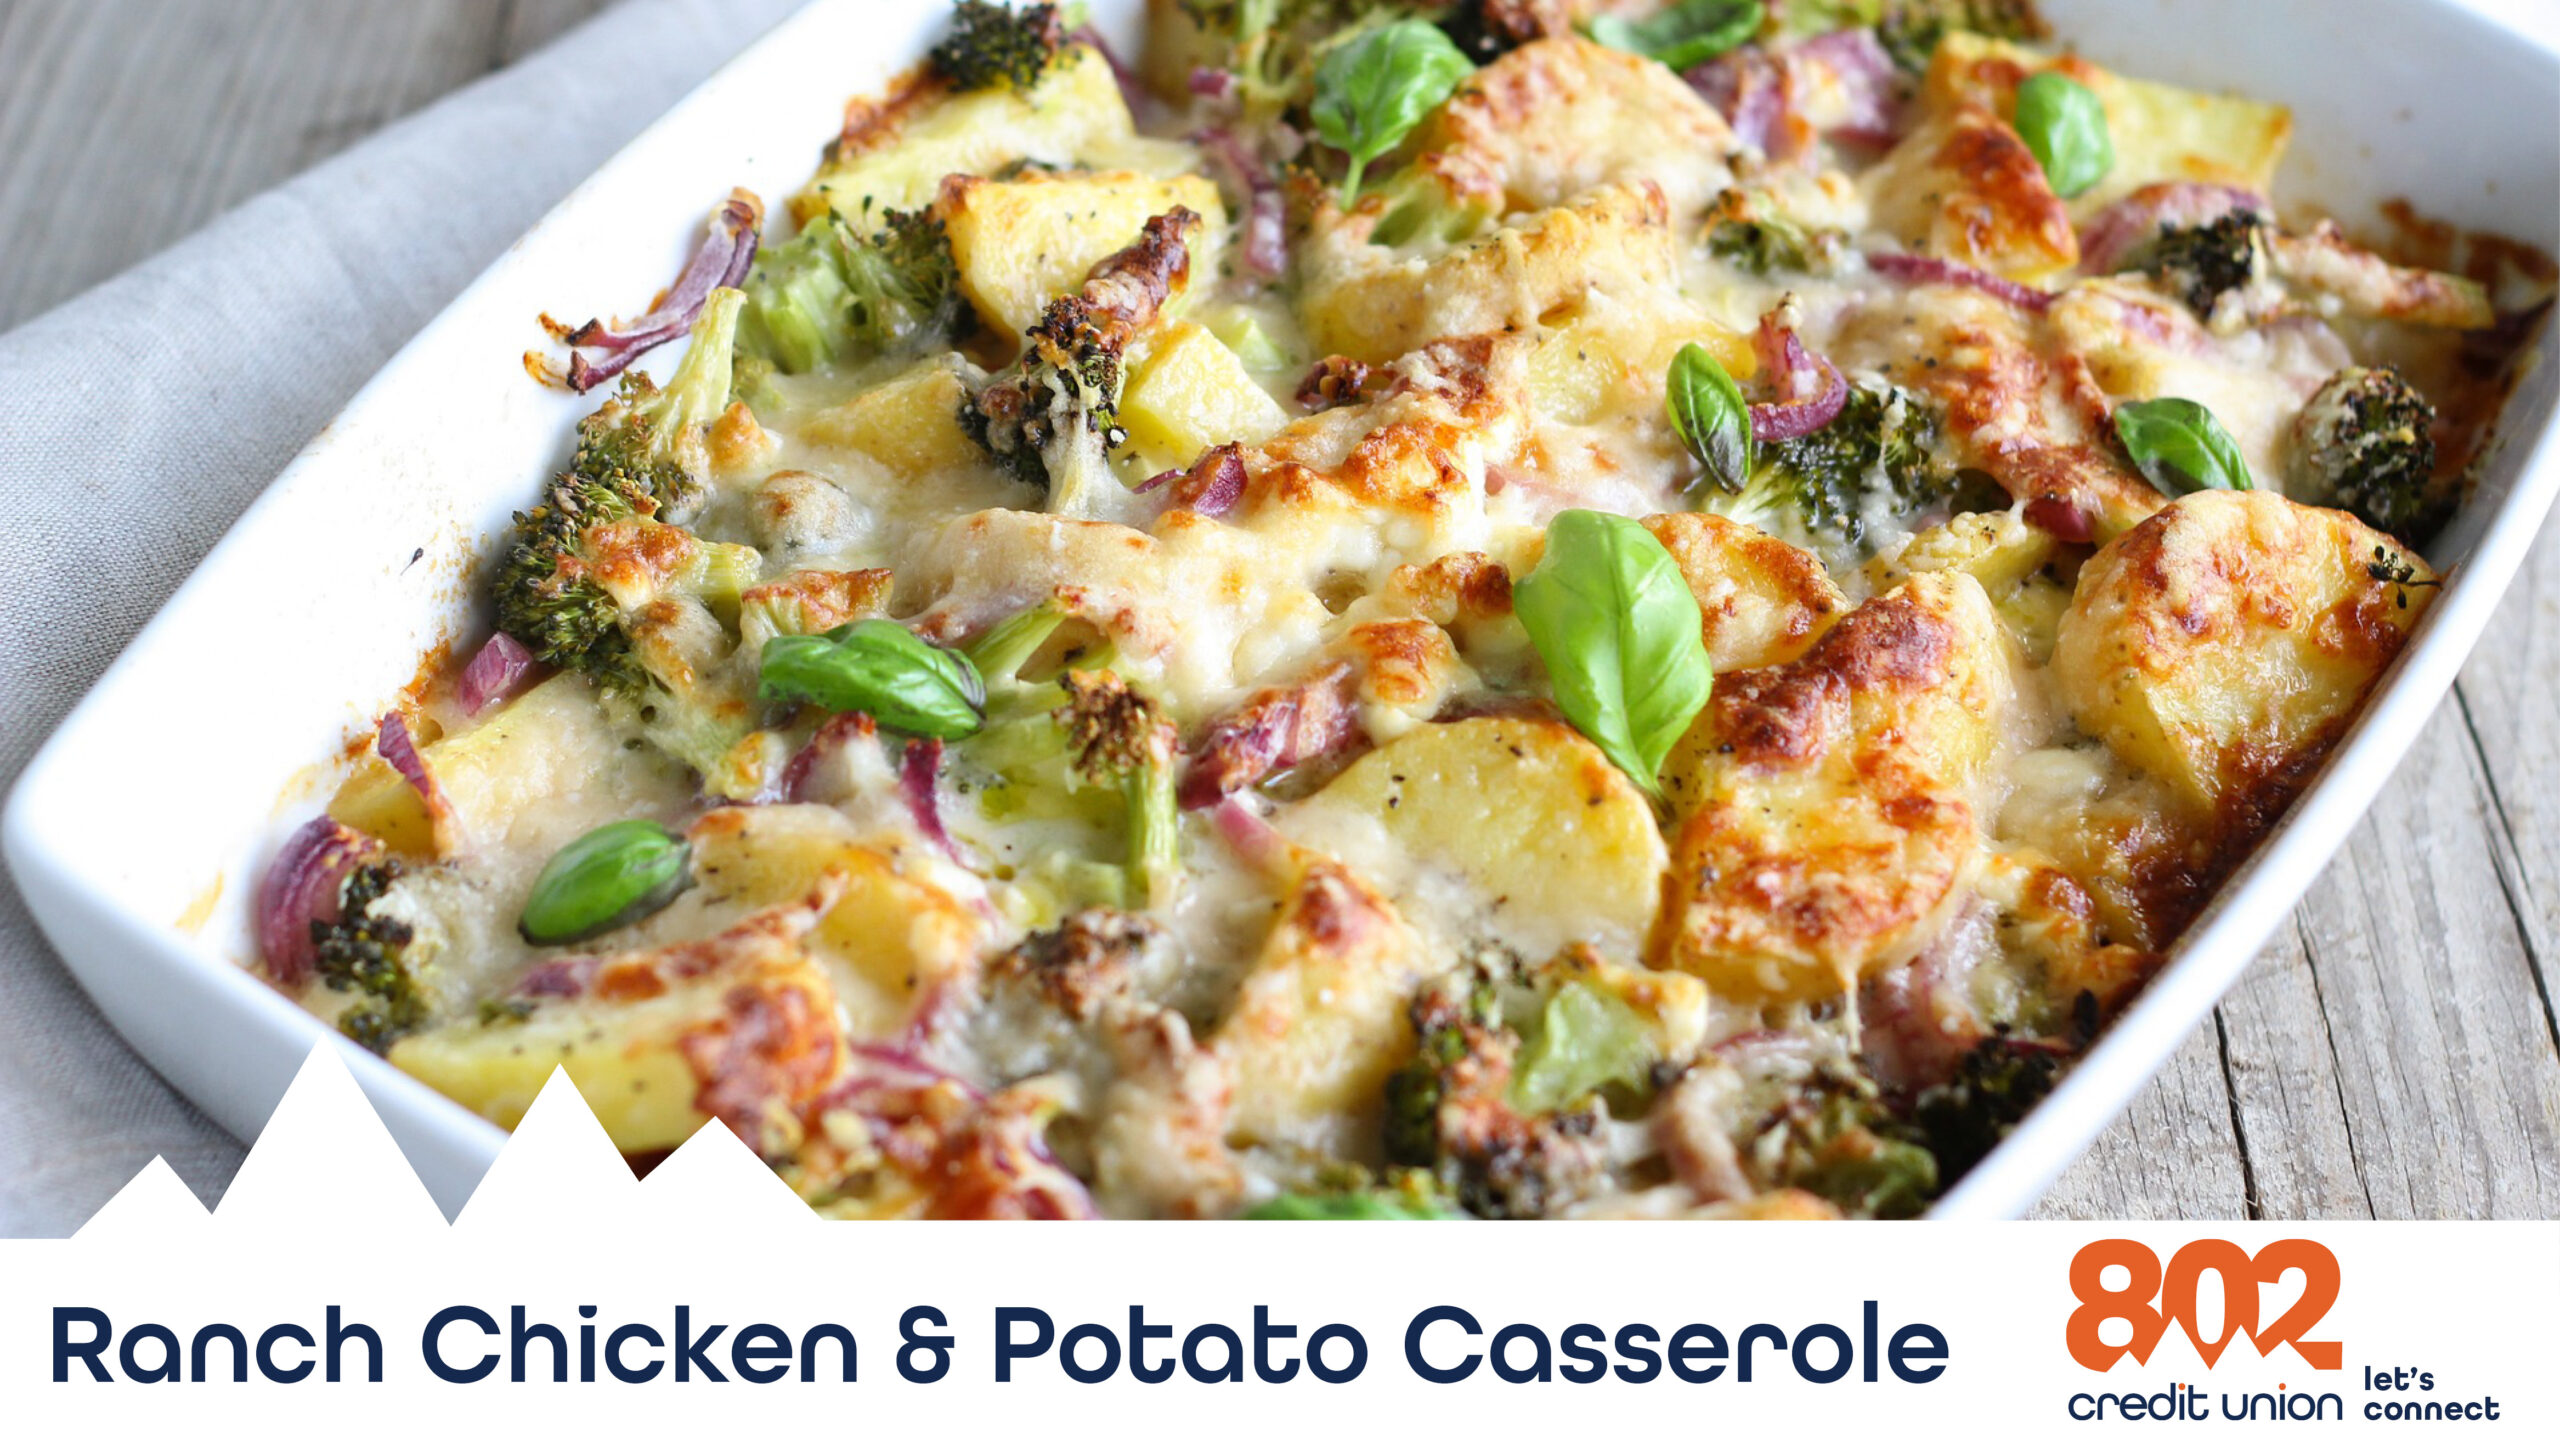 Image of the ranch chicken and potato casserole.